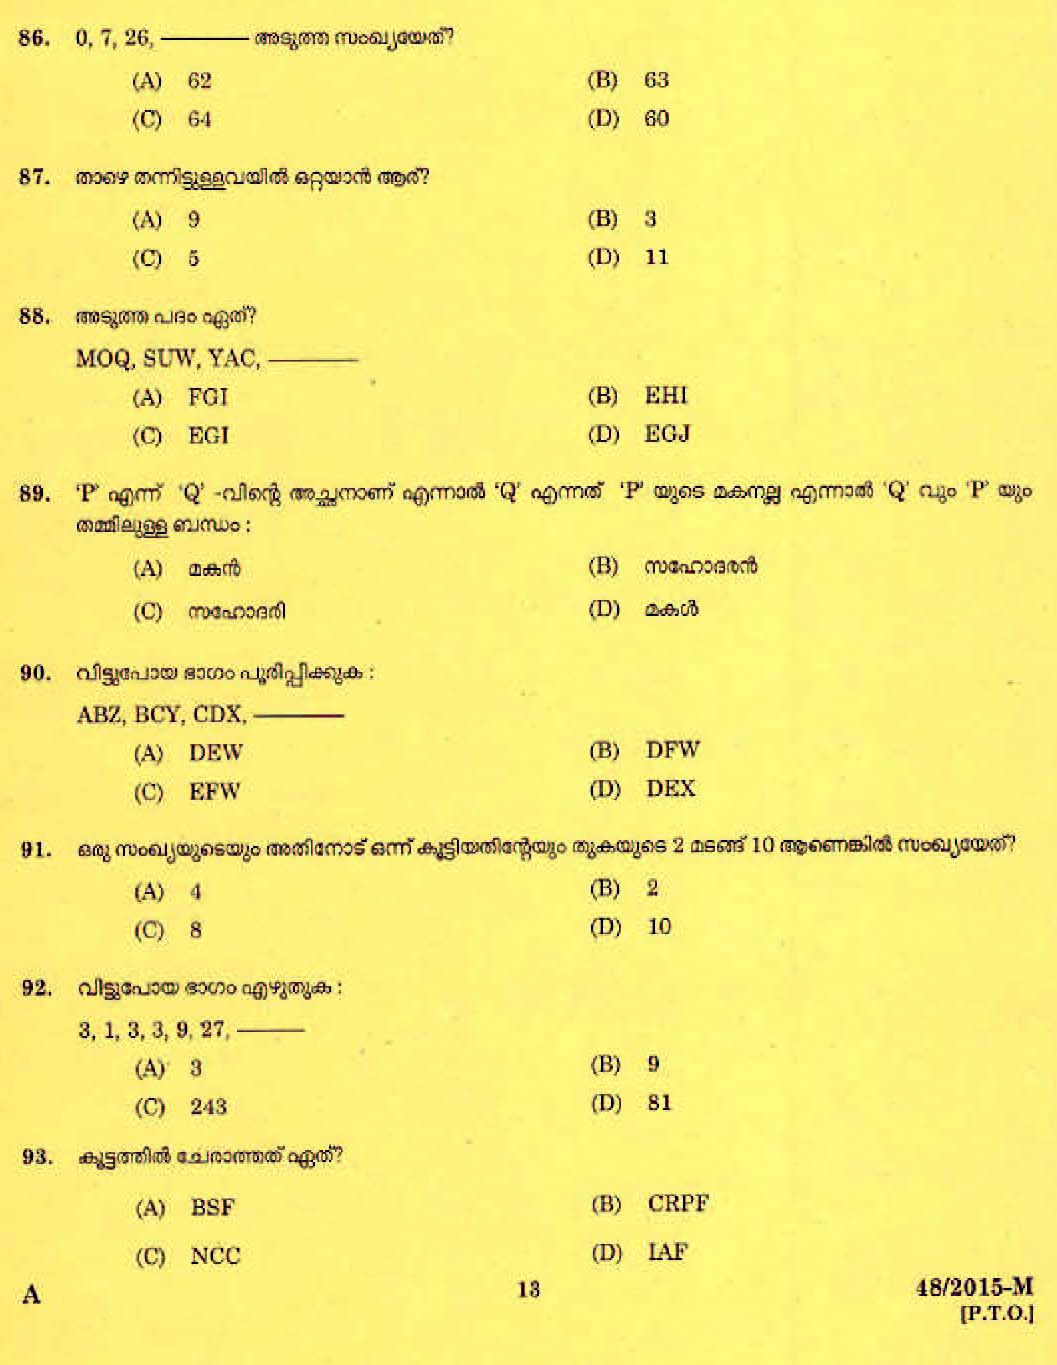 LD Clerk Bill Collector Question Paper Malayalam 2015 Paper Code 482015 M 11